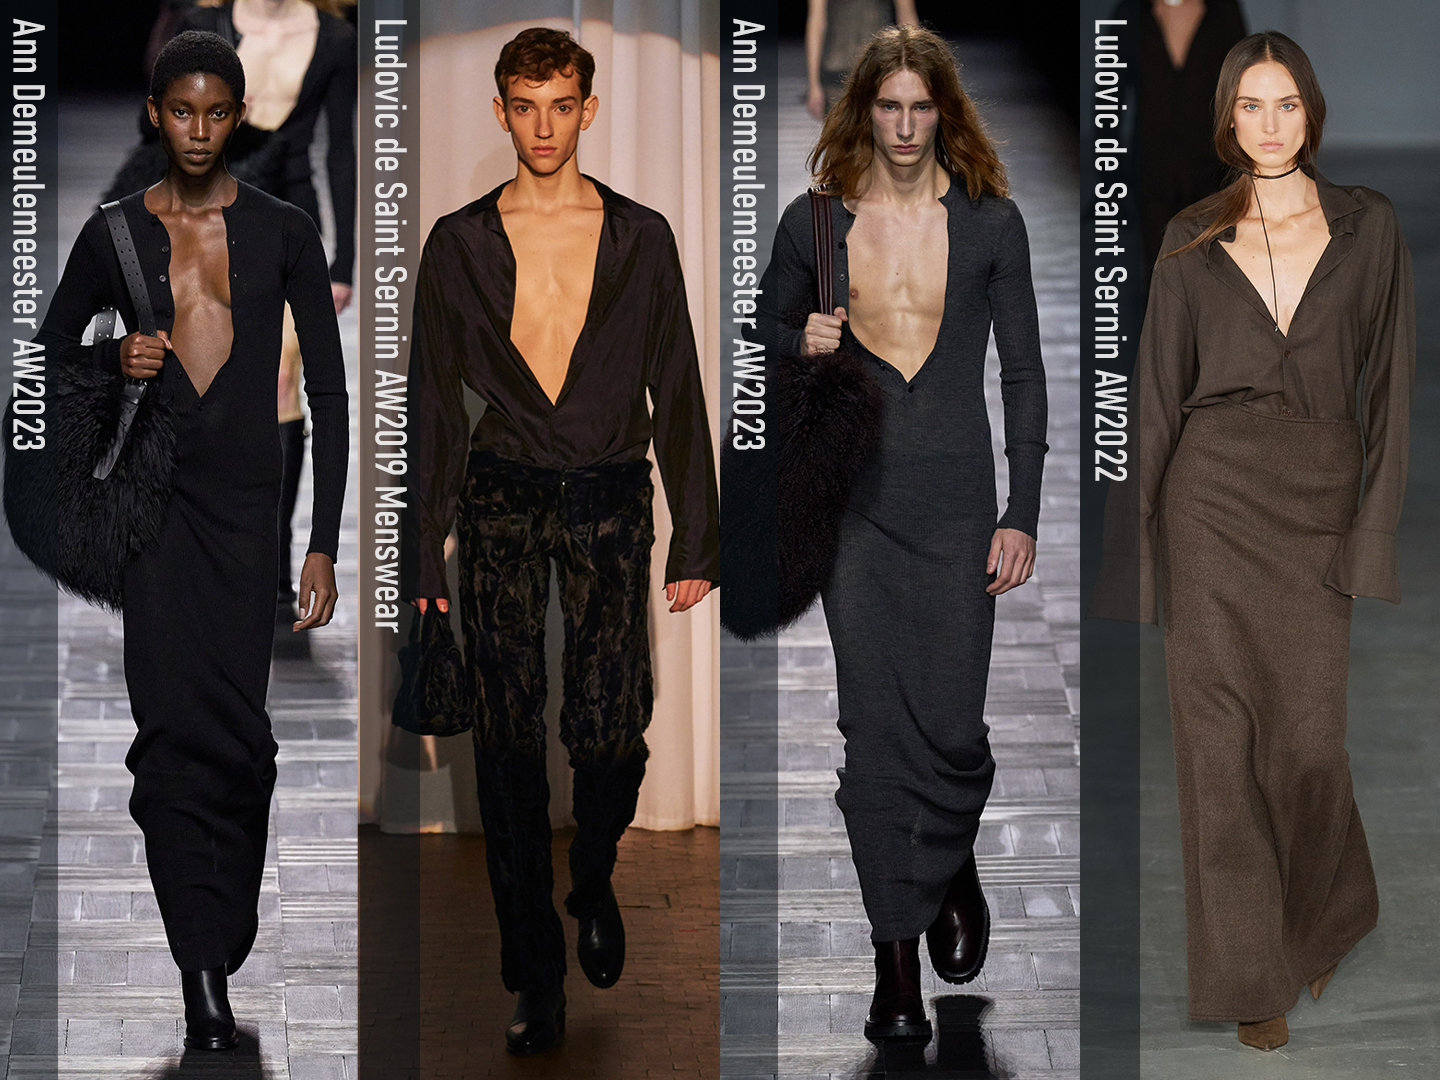 Ann Demeulemeester 2023 Looks 18 and 20 vs Ludovic de Saint Sernin AW2022 Look 3 and AW2019 Menswear Look 11